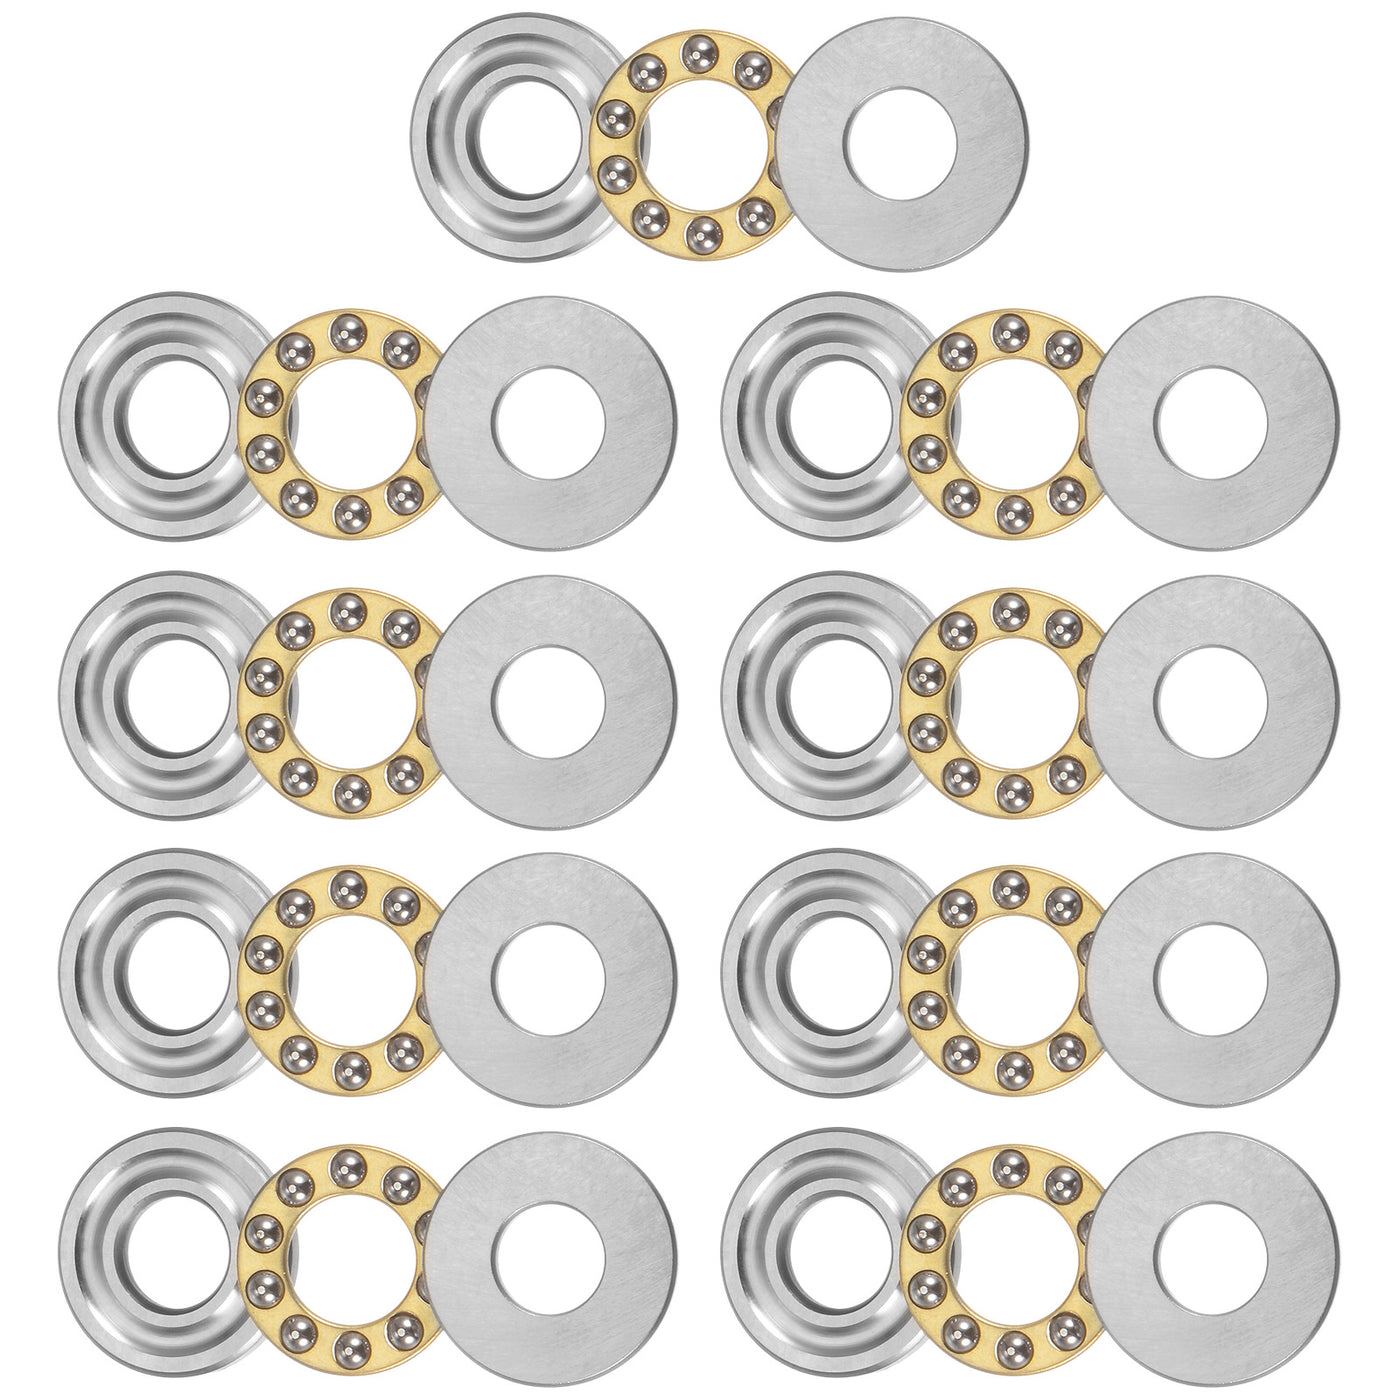 uxcell Uxcell F8-19M Thrust Ball Bearing 8x19x7mm Brass with Washers 9pcs